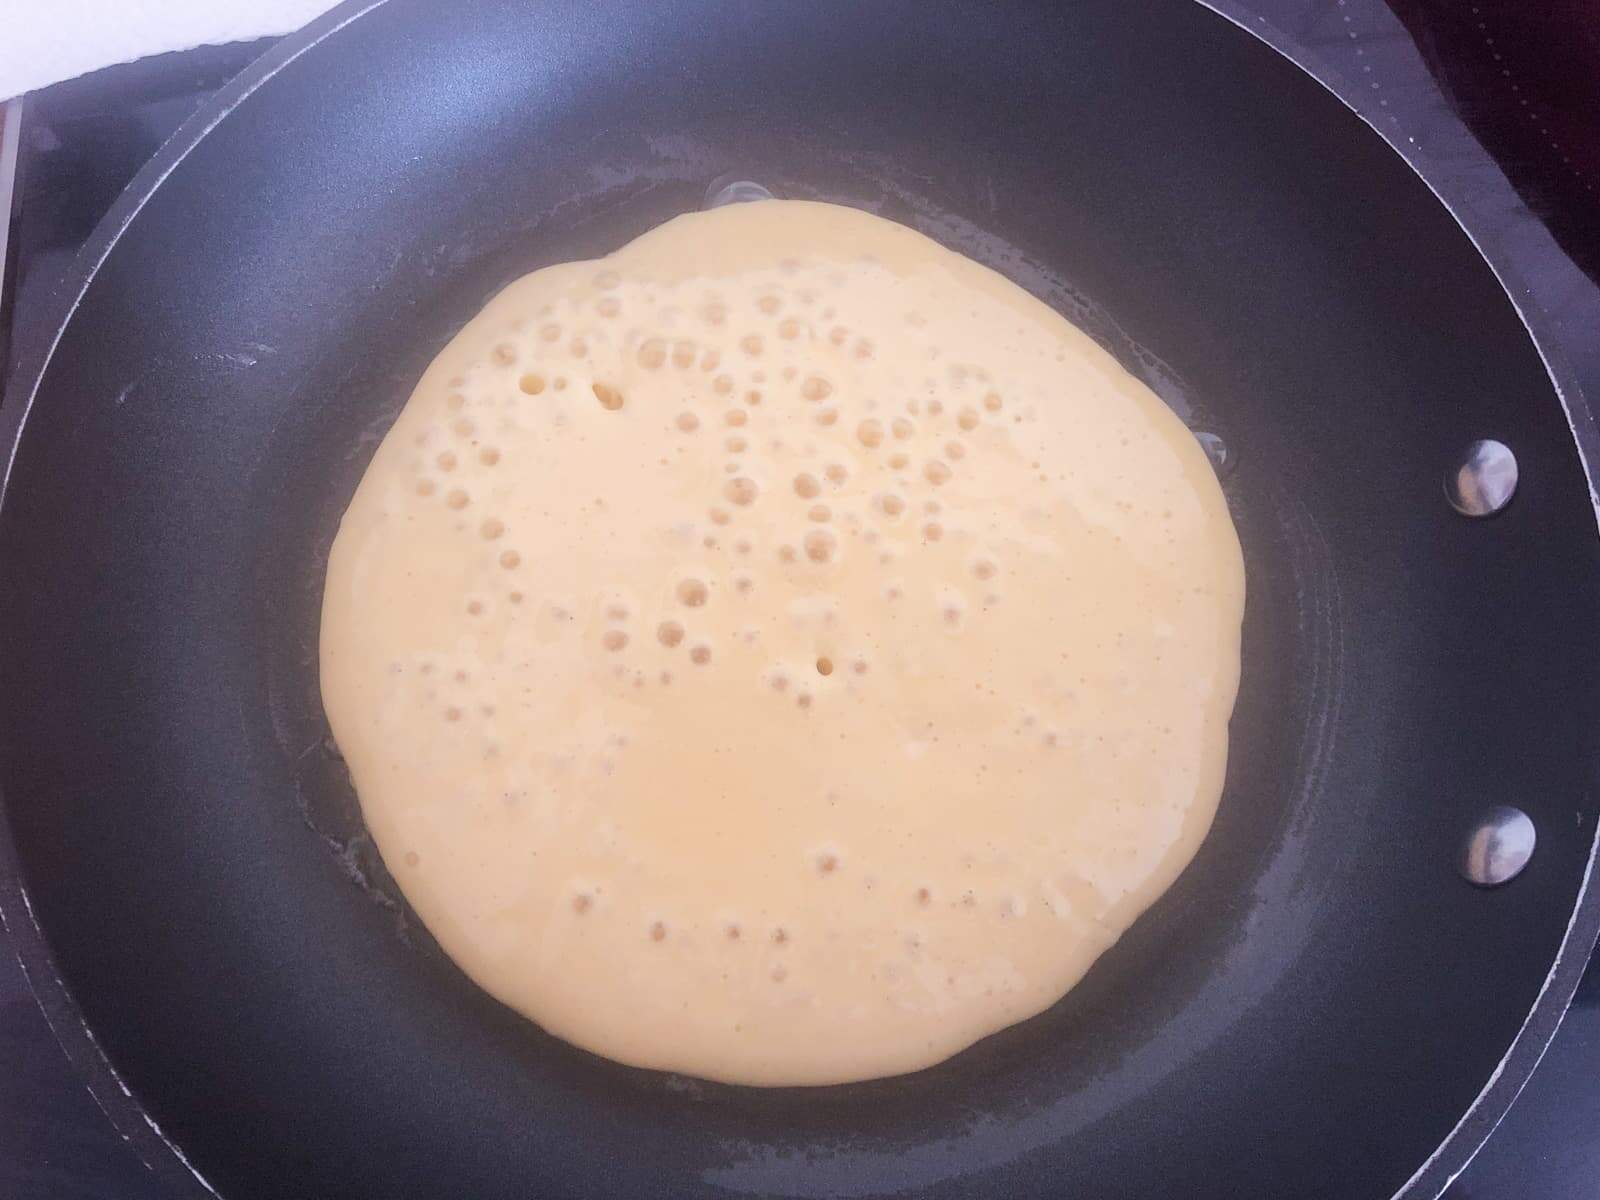 A pancake cooking in a black frying pan ready to be flipped with bubbles showing on the top.